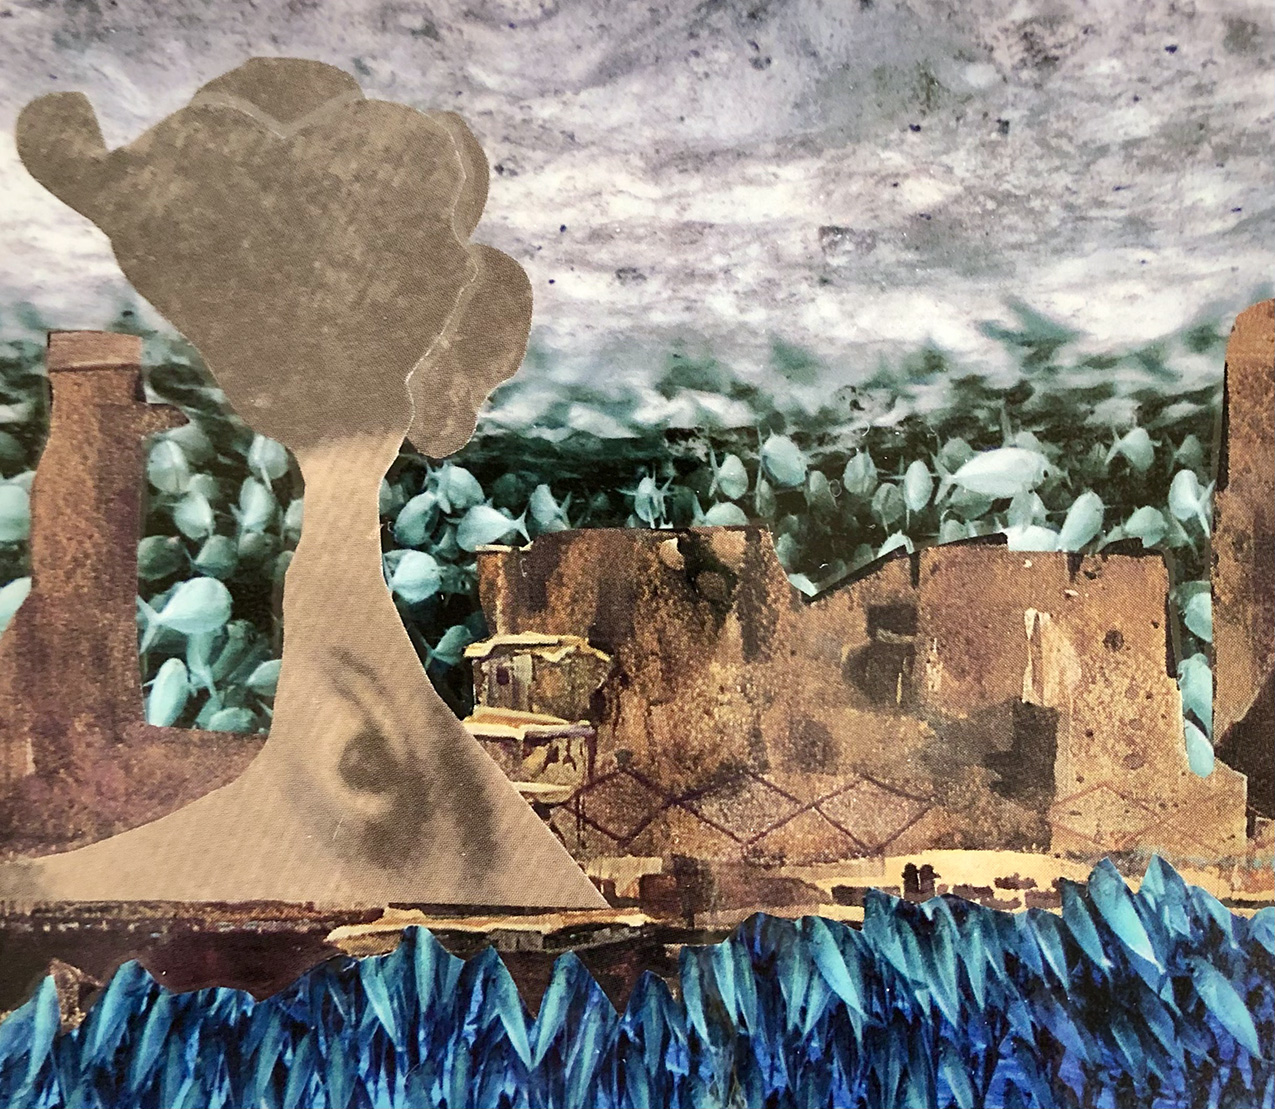 collage featuring backgrounds of a school of blue fish (bottom), a school of white fish (middle), and dirty ice (top) with rough brown structures in the center and an eyeball printed on a shape that is tree-like but also reminisent of a smokestack